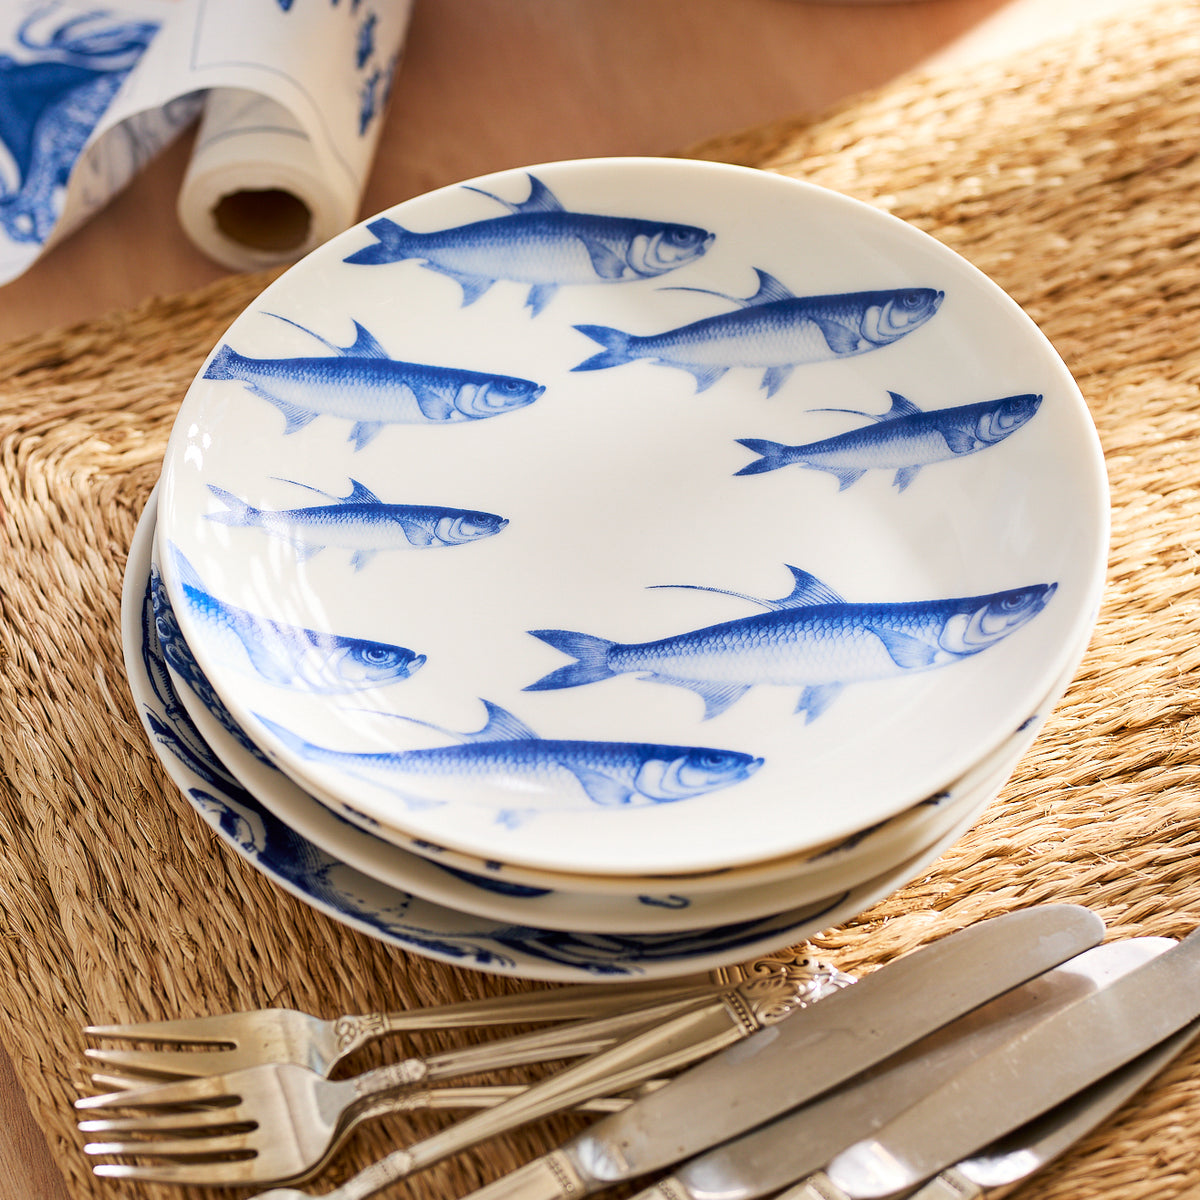 Stack of Caskata Lake House Bundle plates decorated with a school of fish designs, set on a woven placemat beside silver forks and knives, perfect for your lake house.